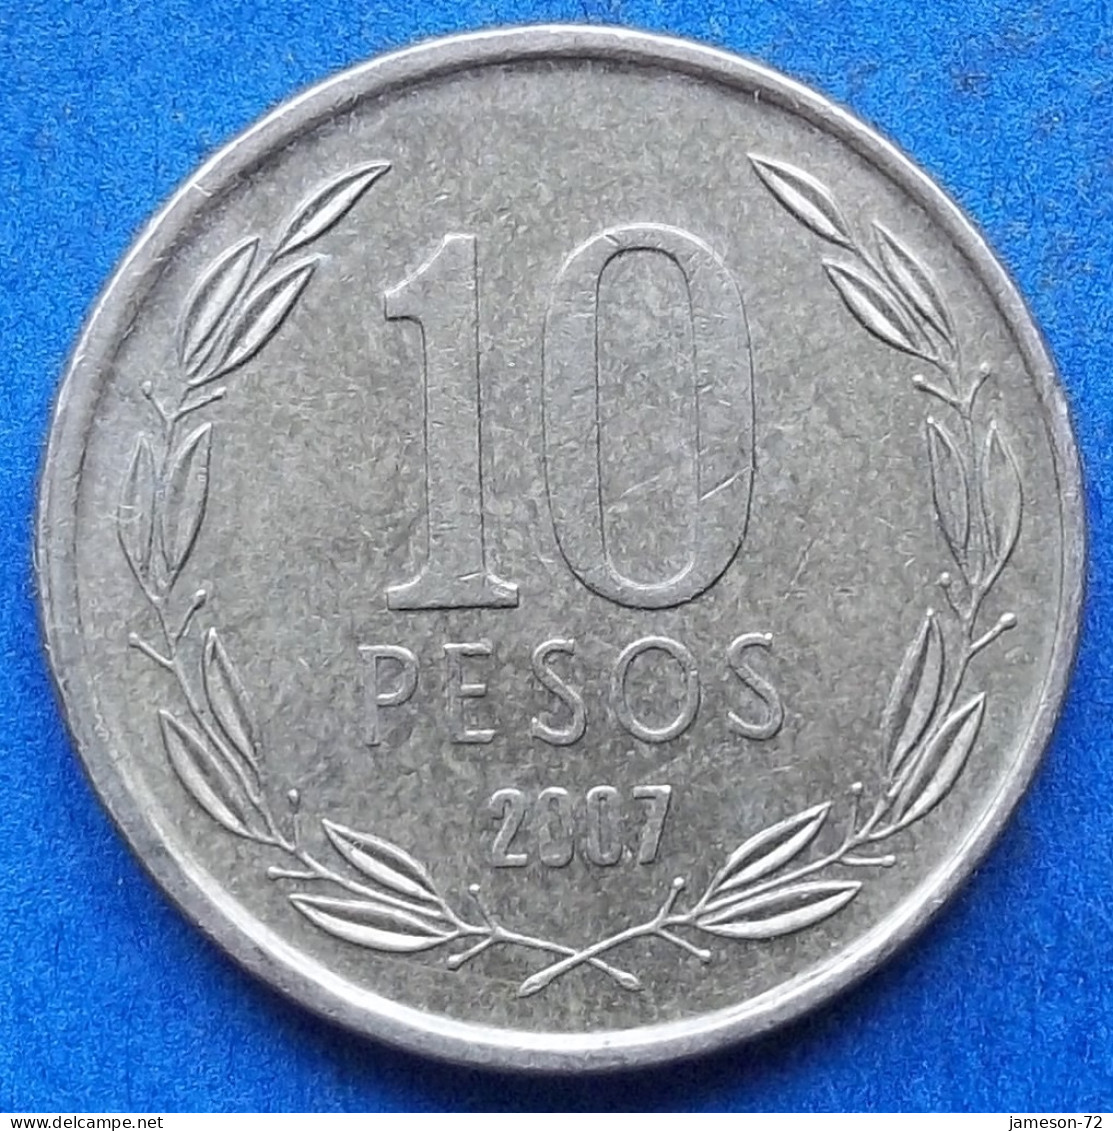 CHILE - 10 Pesos 2007 KM# 228.2 Monetary Reform (1975) - Edelweiss Coins - Chile